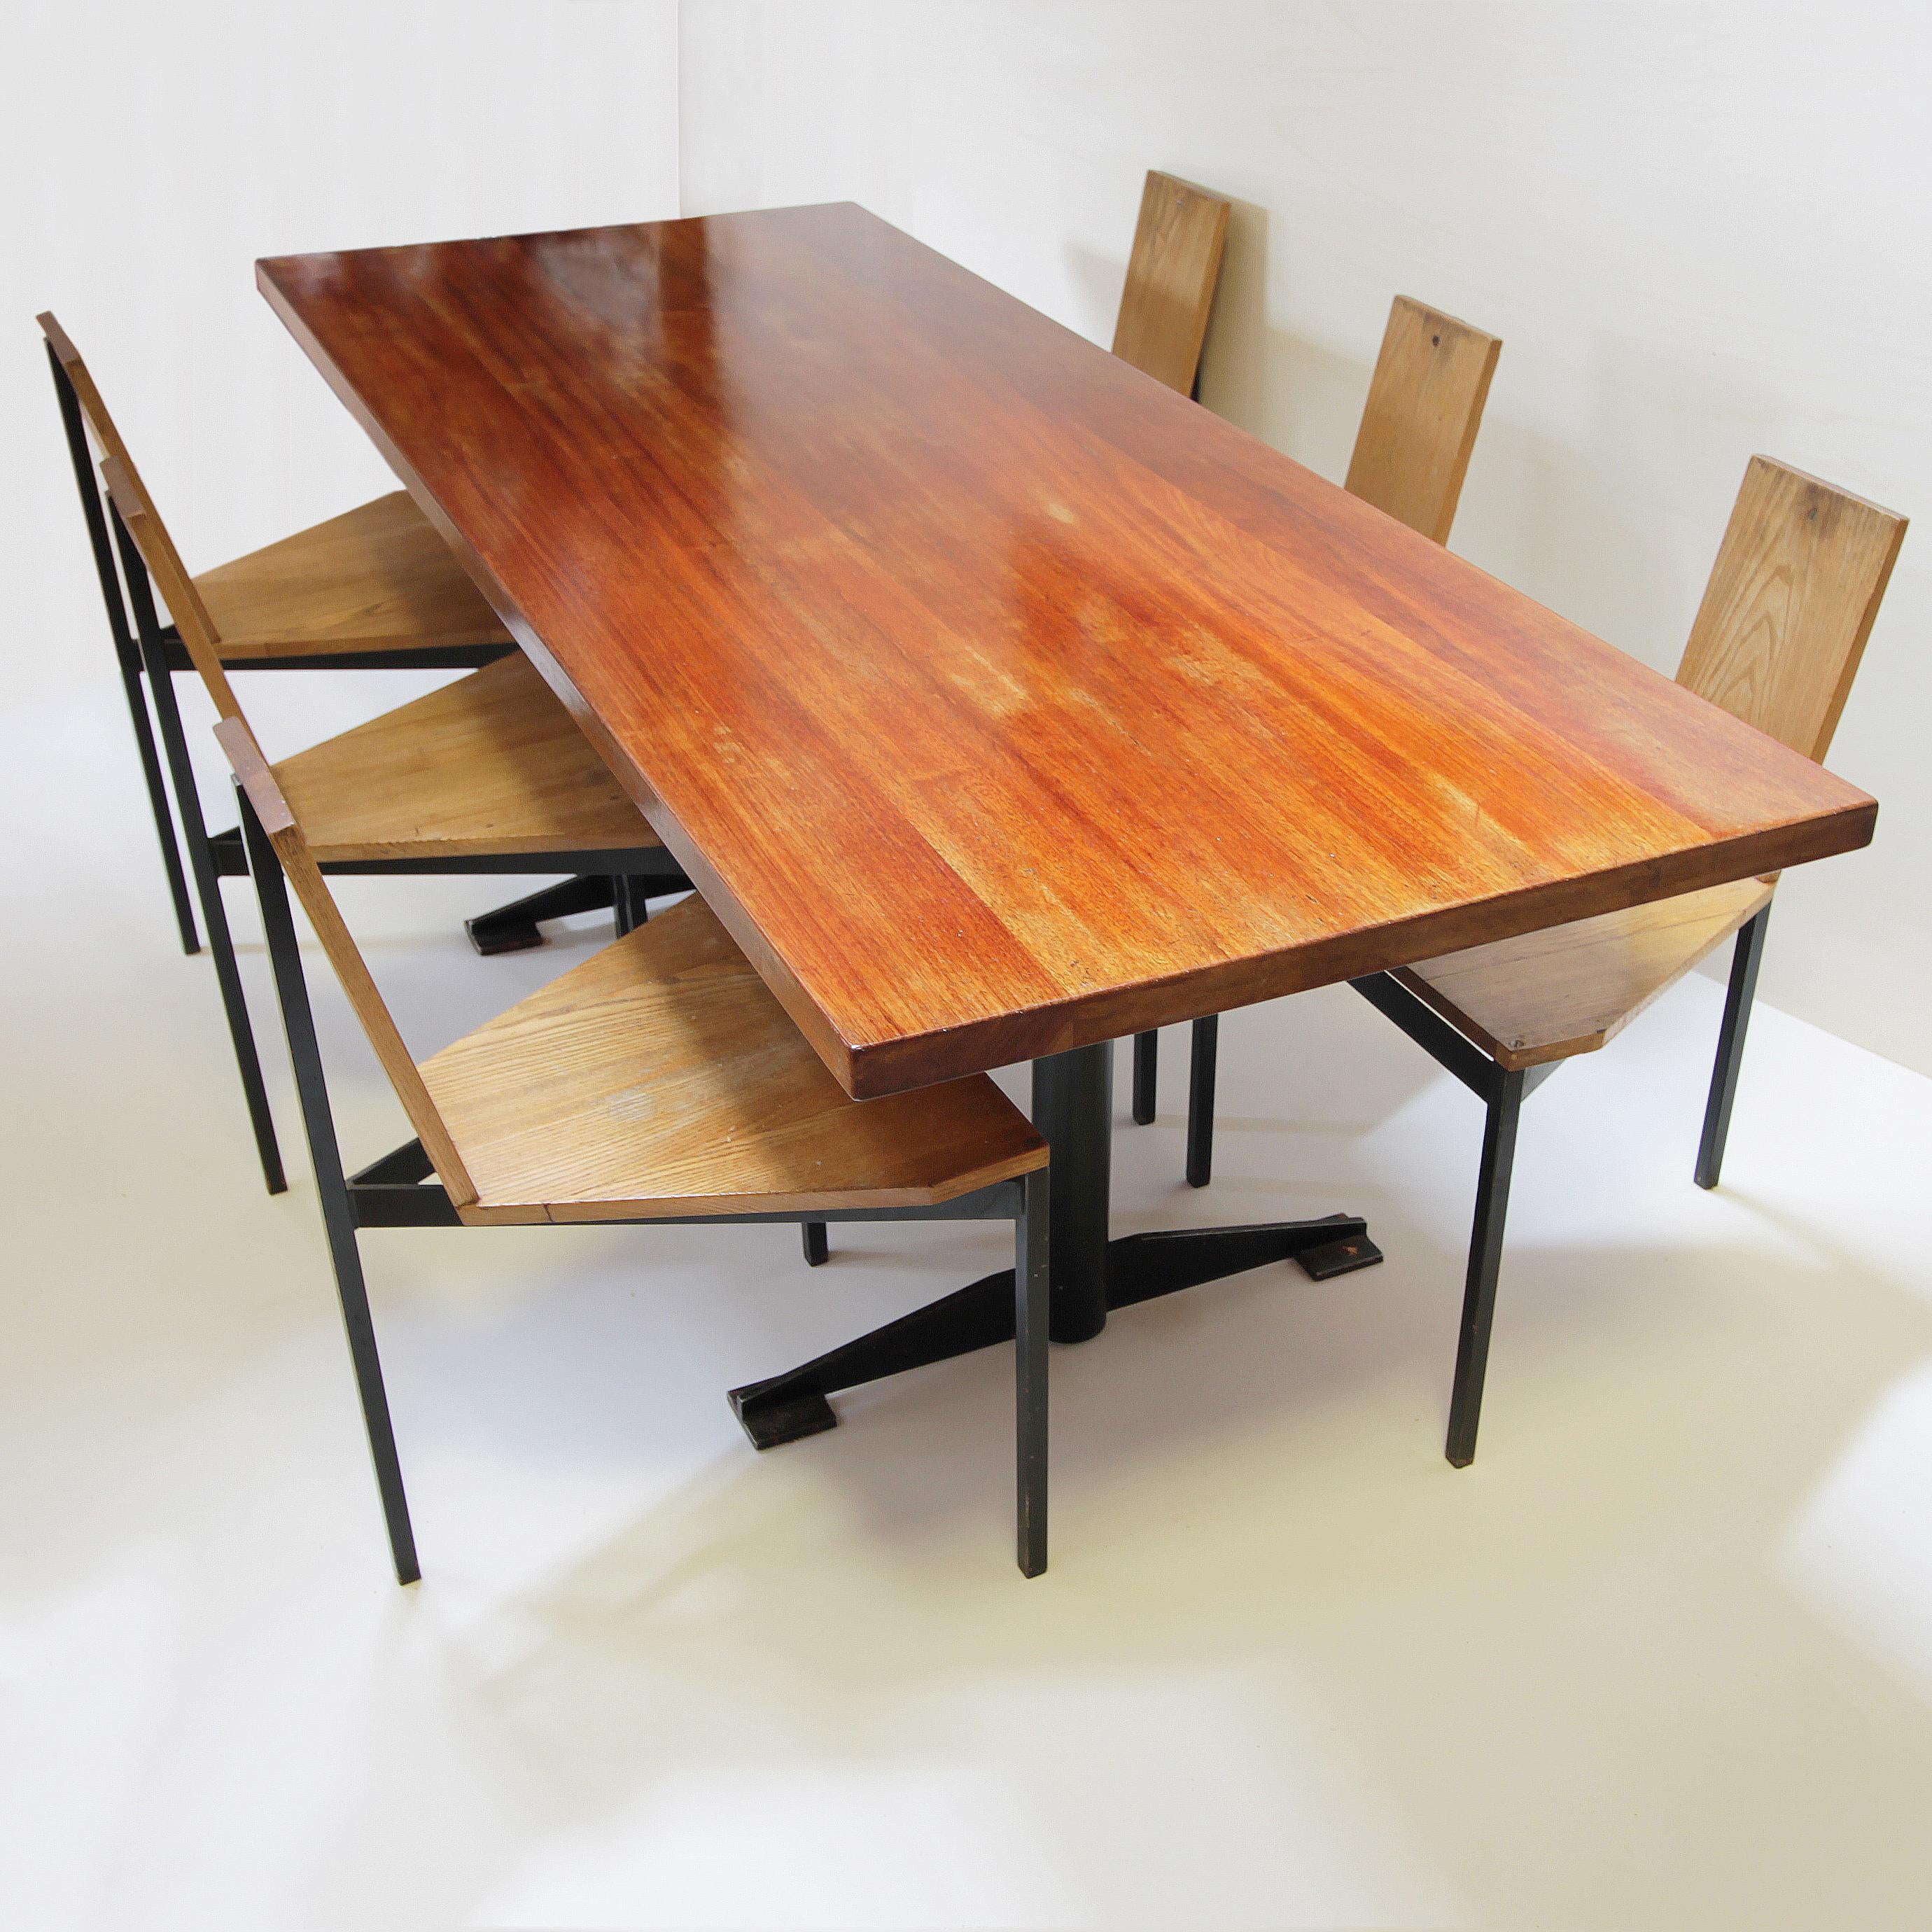 Dining Table and Six '6' Chairs by Wim Den Boon, Netherlands 1958 For Sale 8